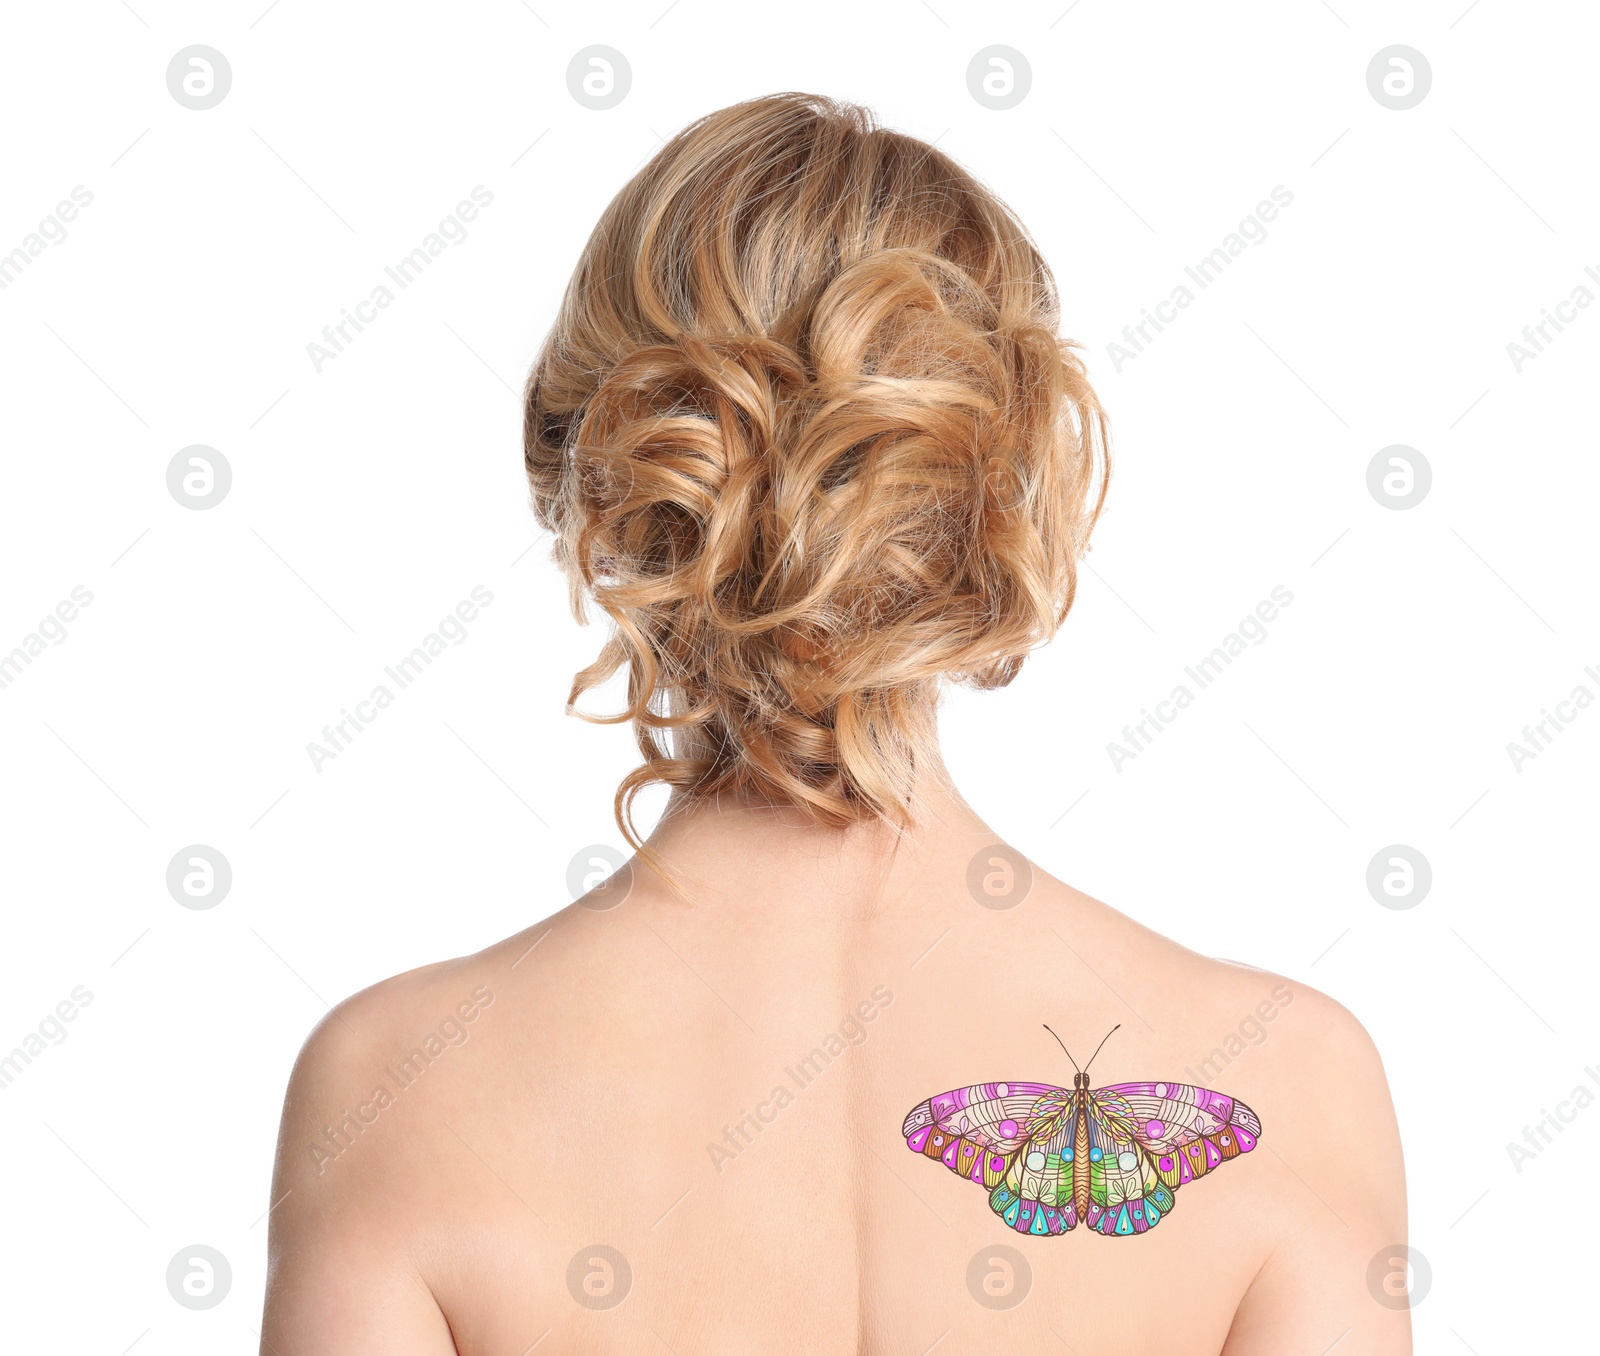 Image of Young woman with colorful tattoo of butterfly on her body against white background, back view